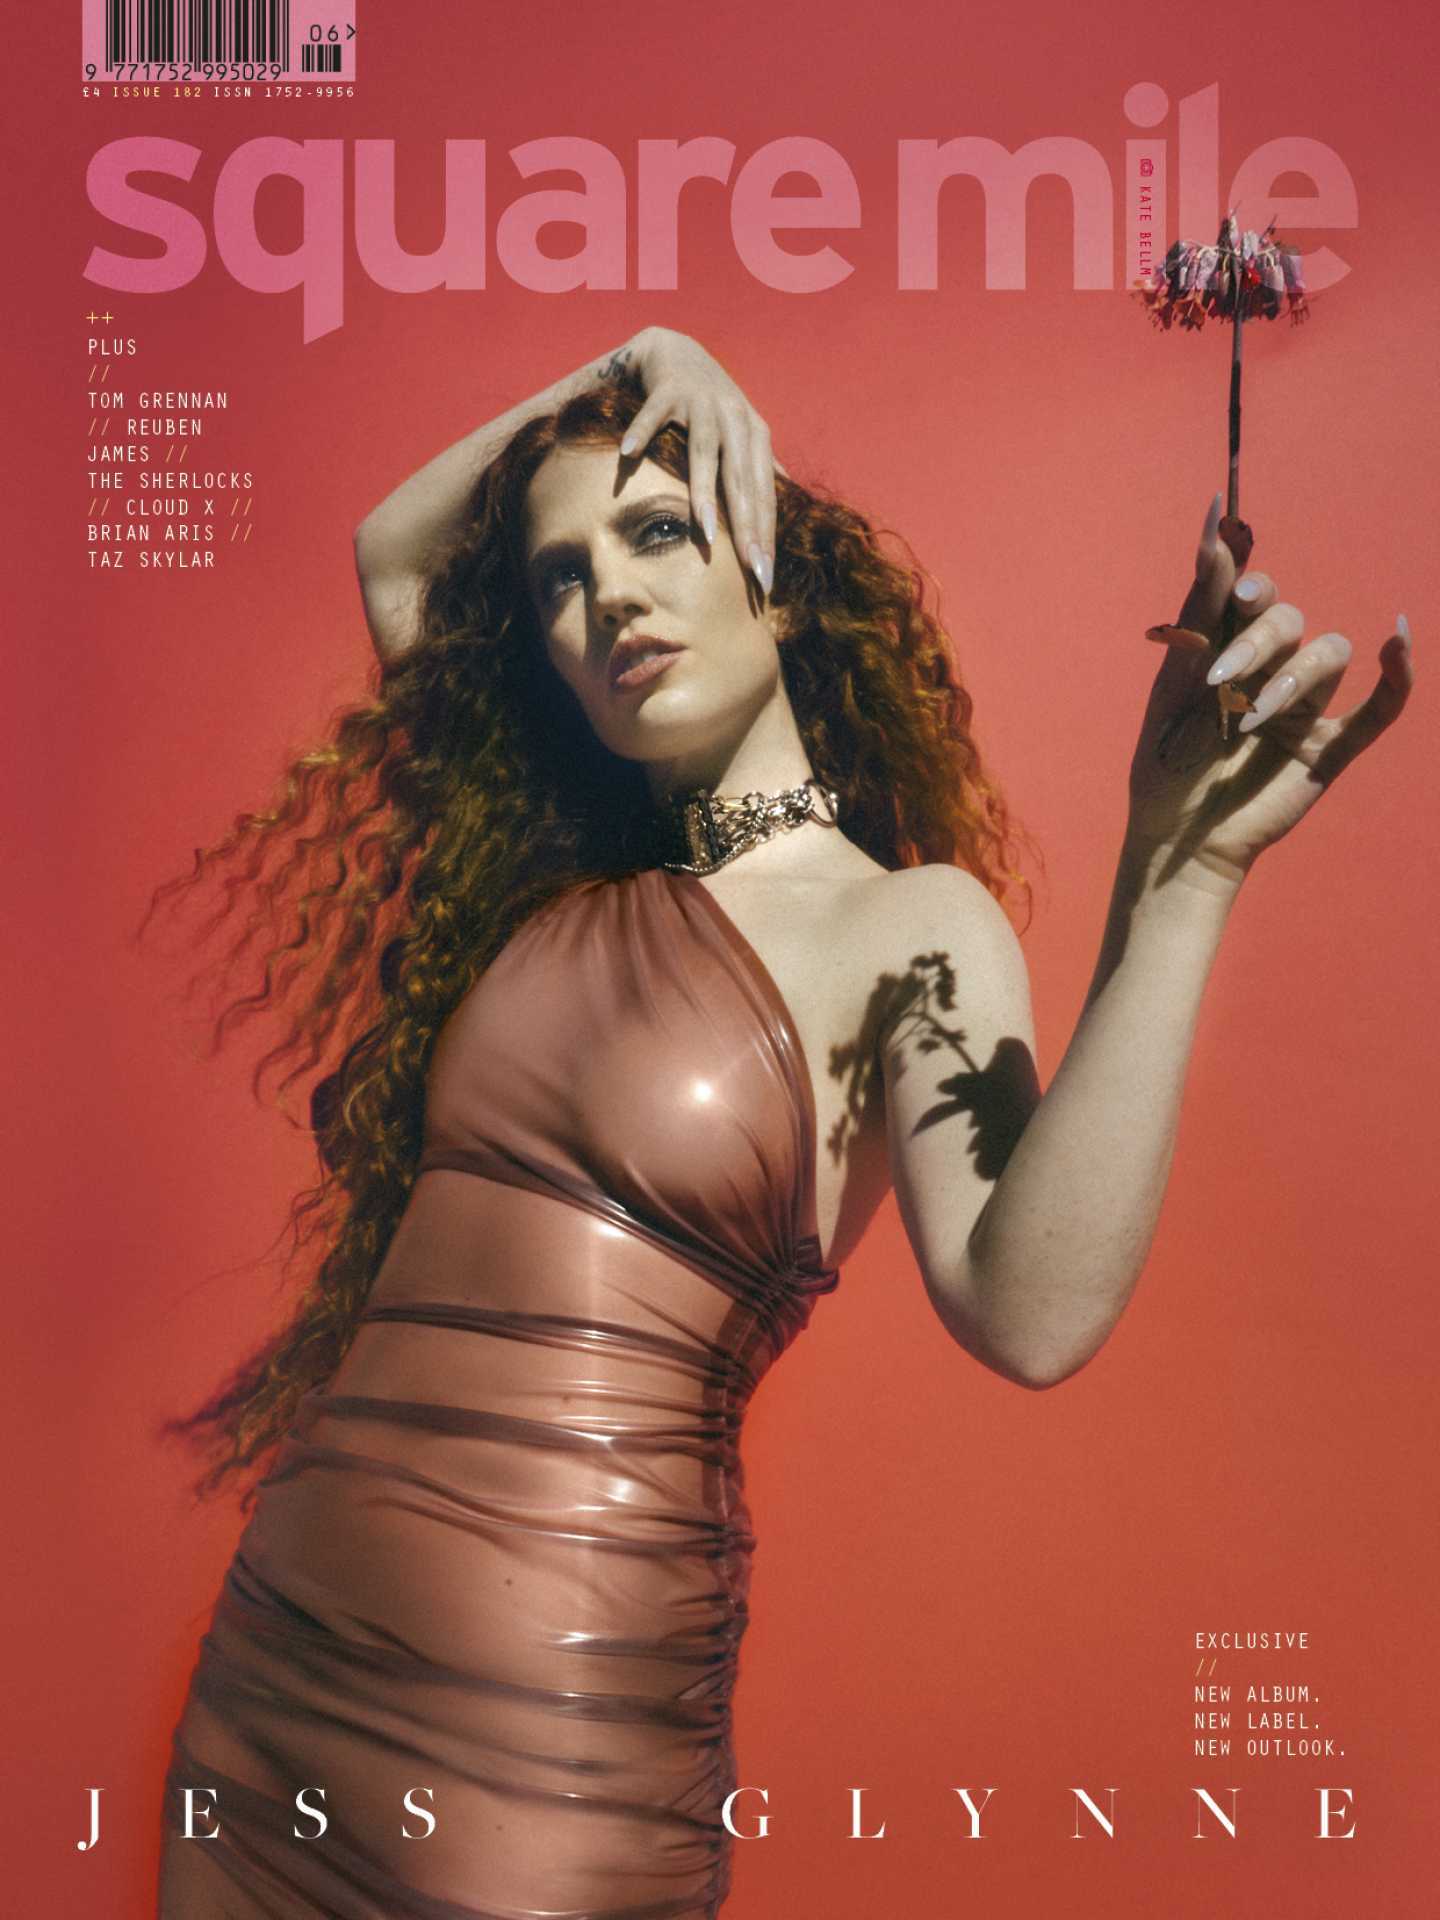 Jess Glynne photographed by Kate Bellm